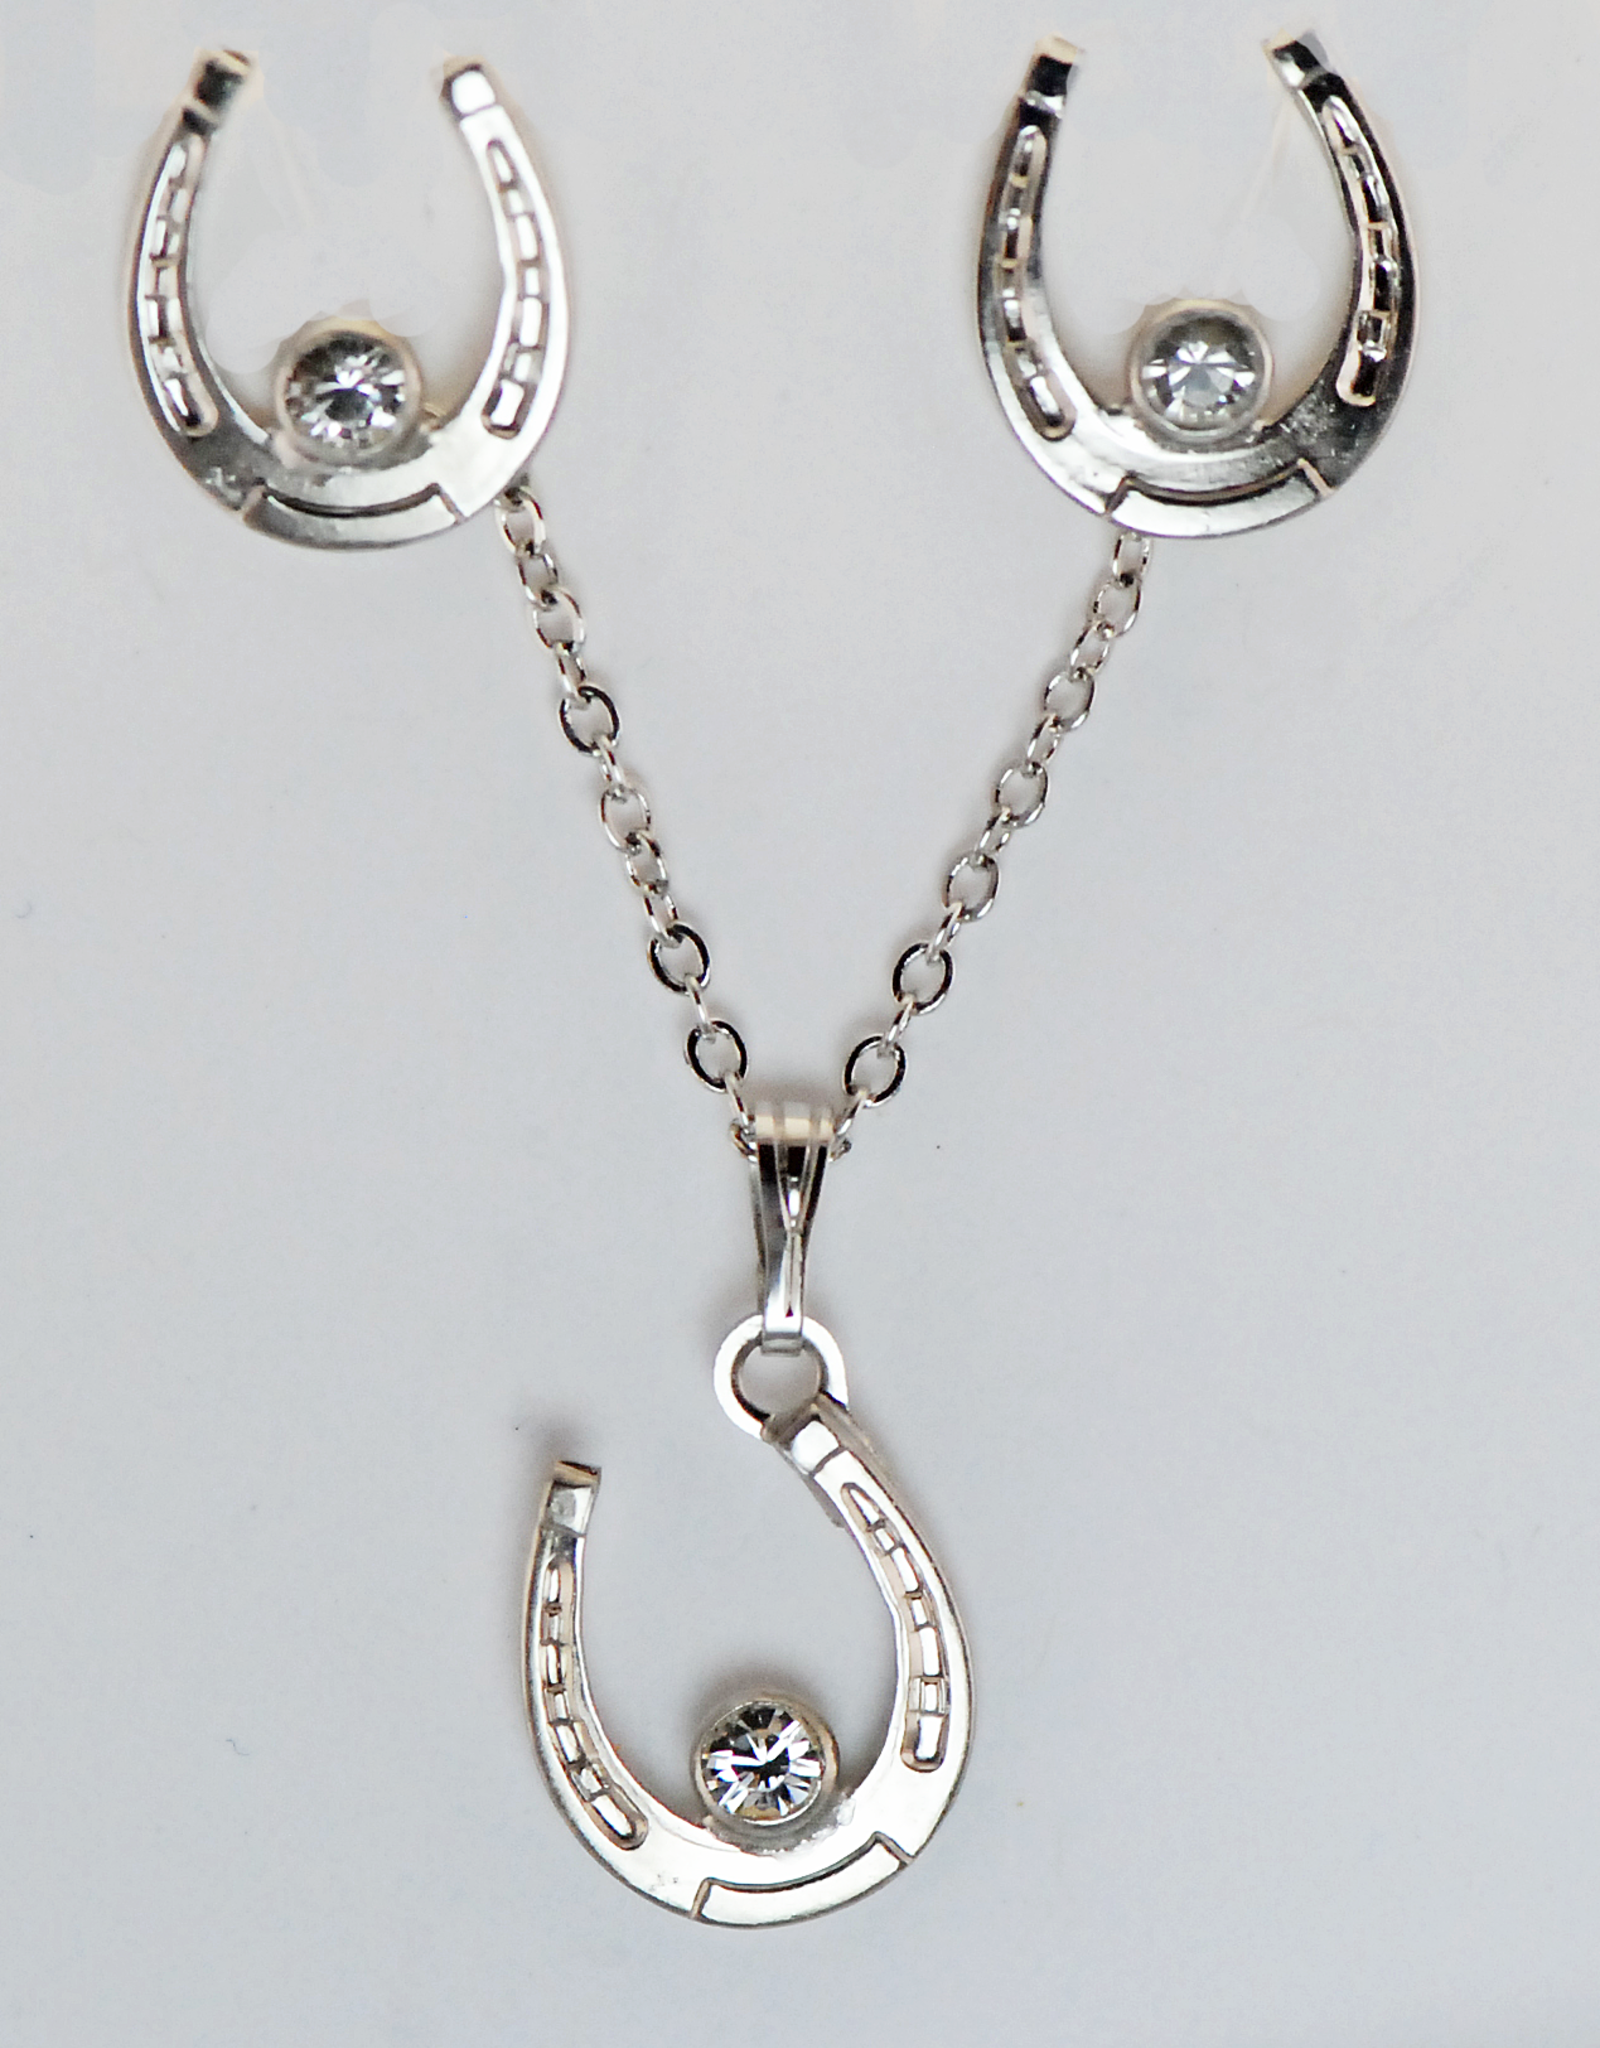 Horse shoe with crystal stone necklace and earring set